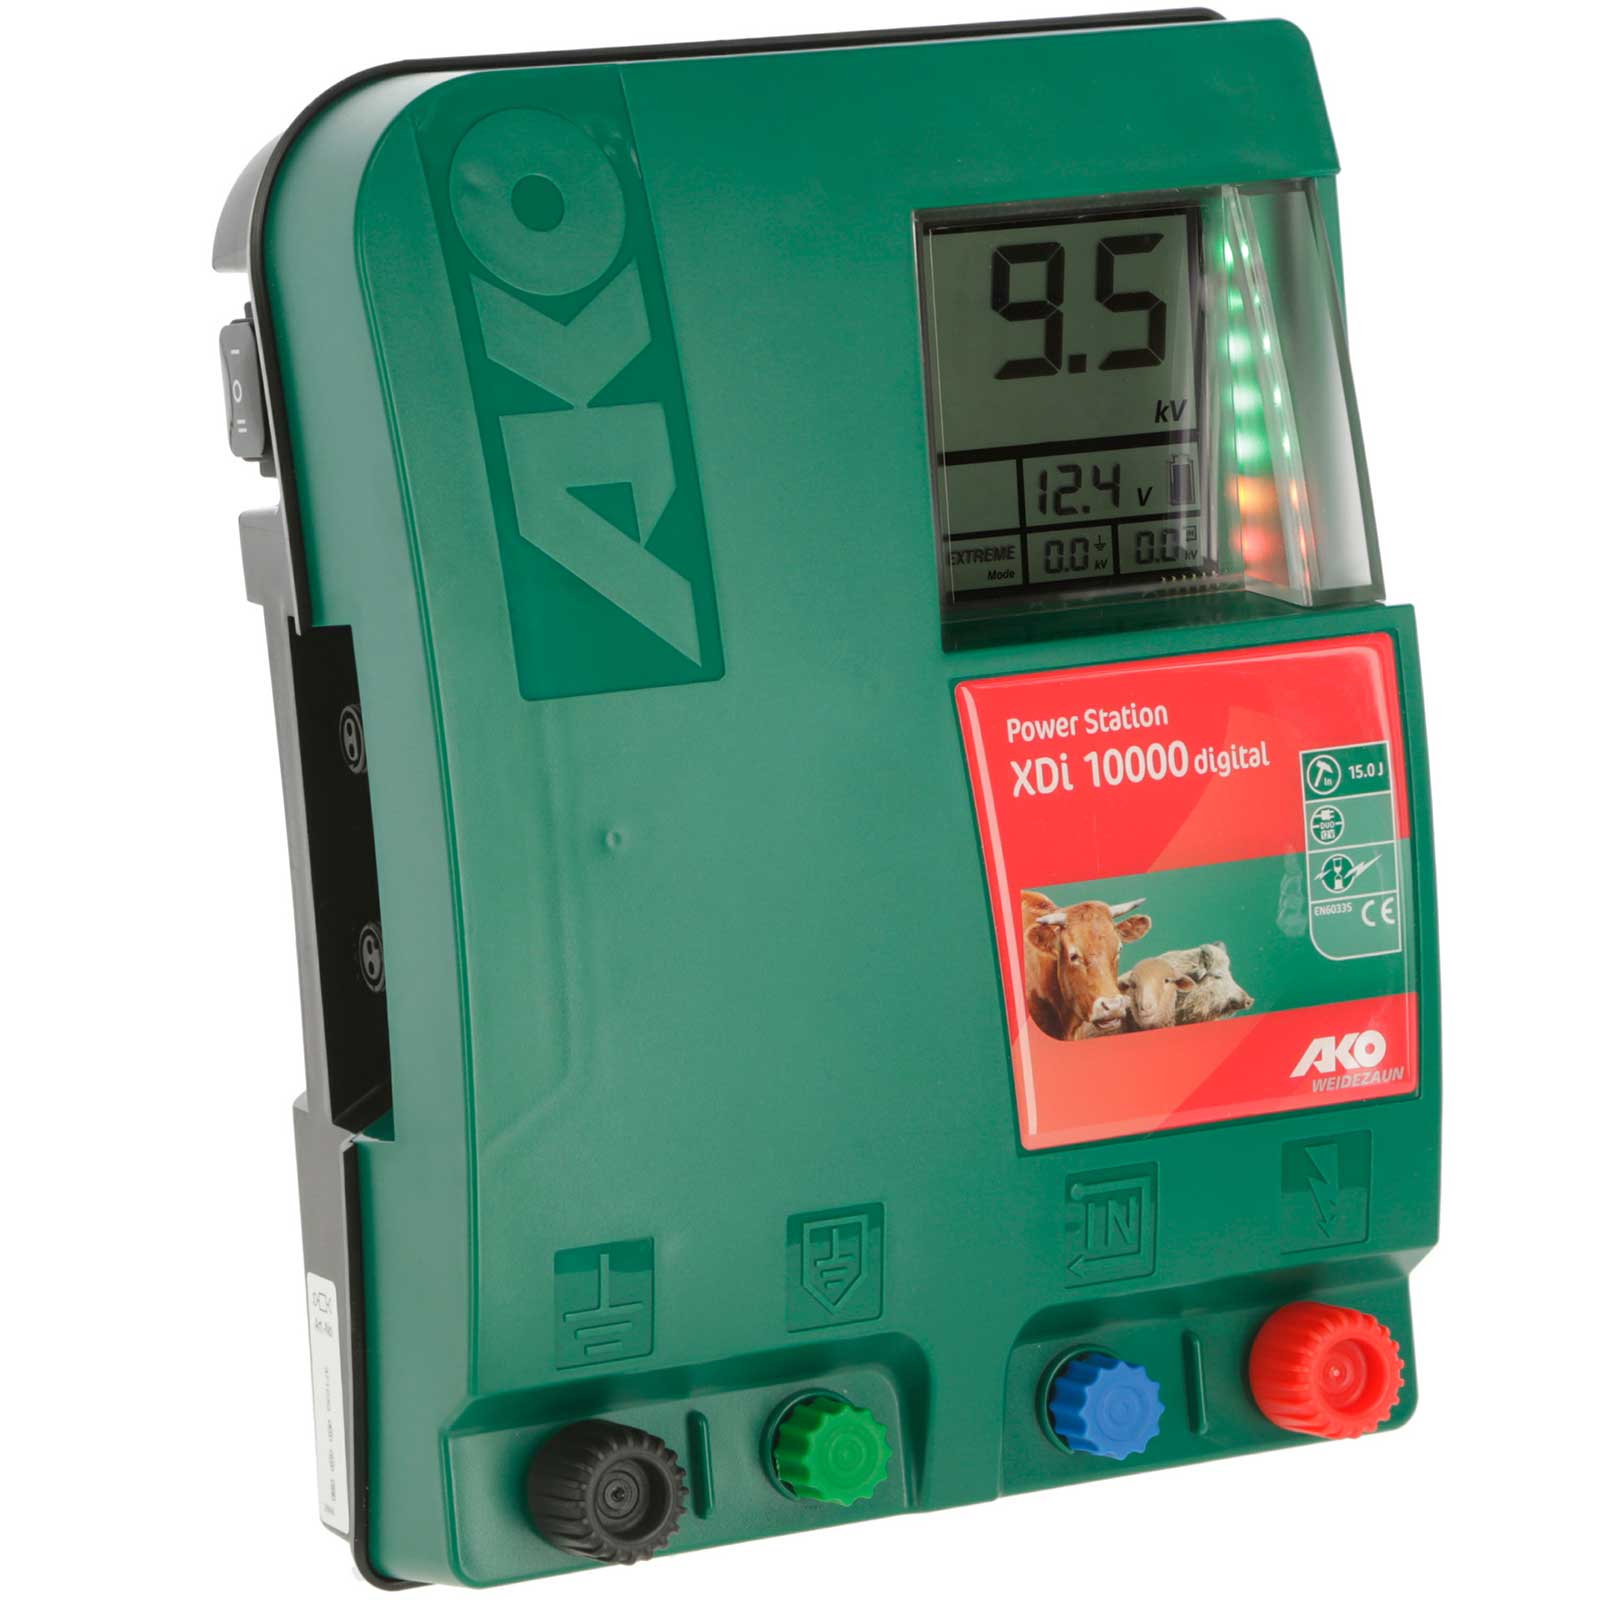 AKO Power Station XDi 10000 digital DUO electric fence energiser, 15 joules